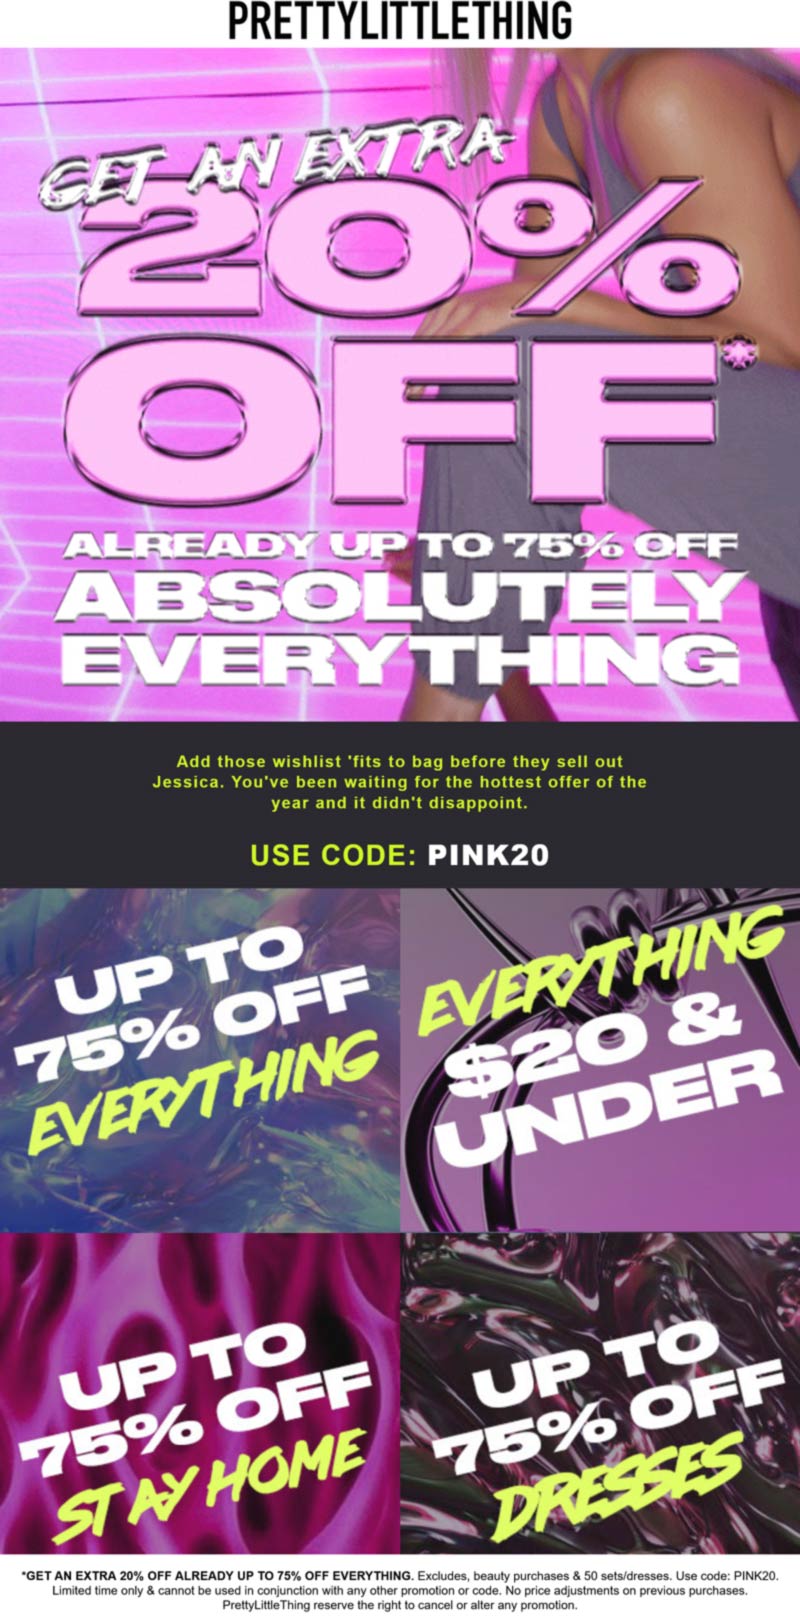 PrettyLittleThing stores Coupon  Extra 20% off everything at PrettyLittleThing via promo code PINK20 #prettylittlething 